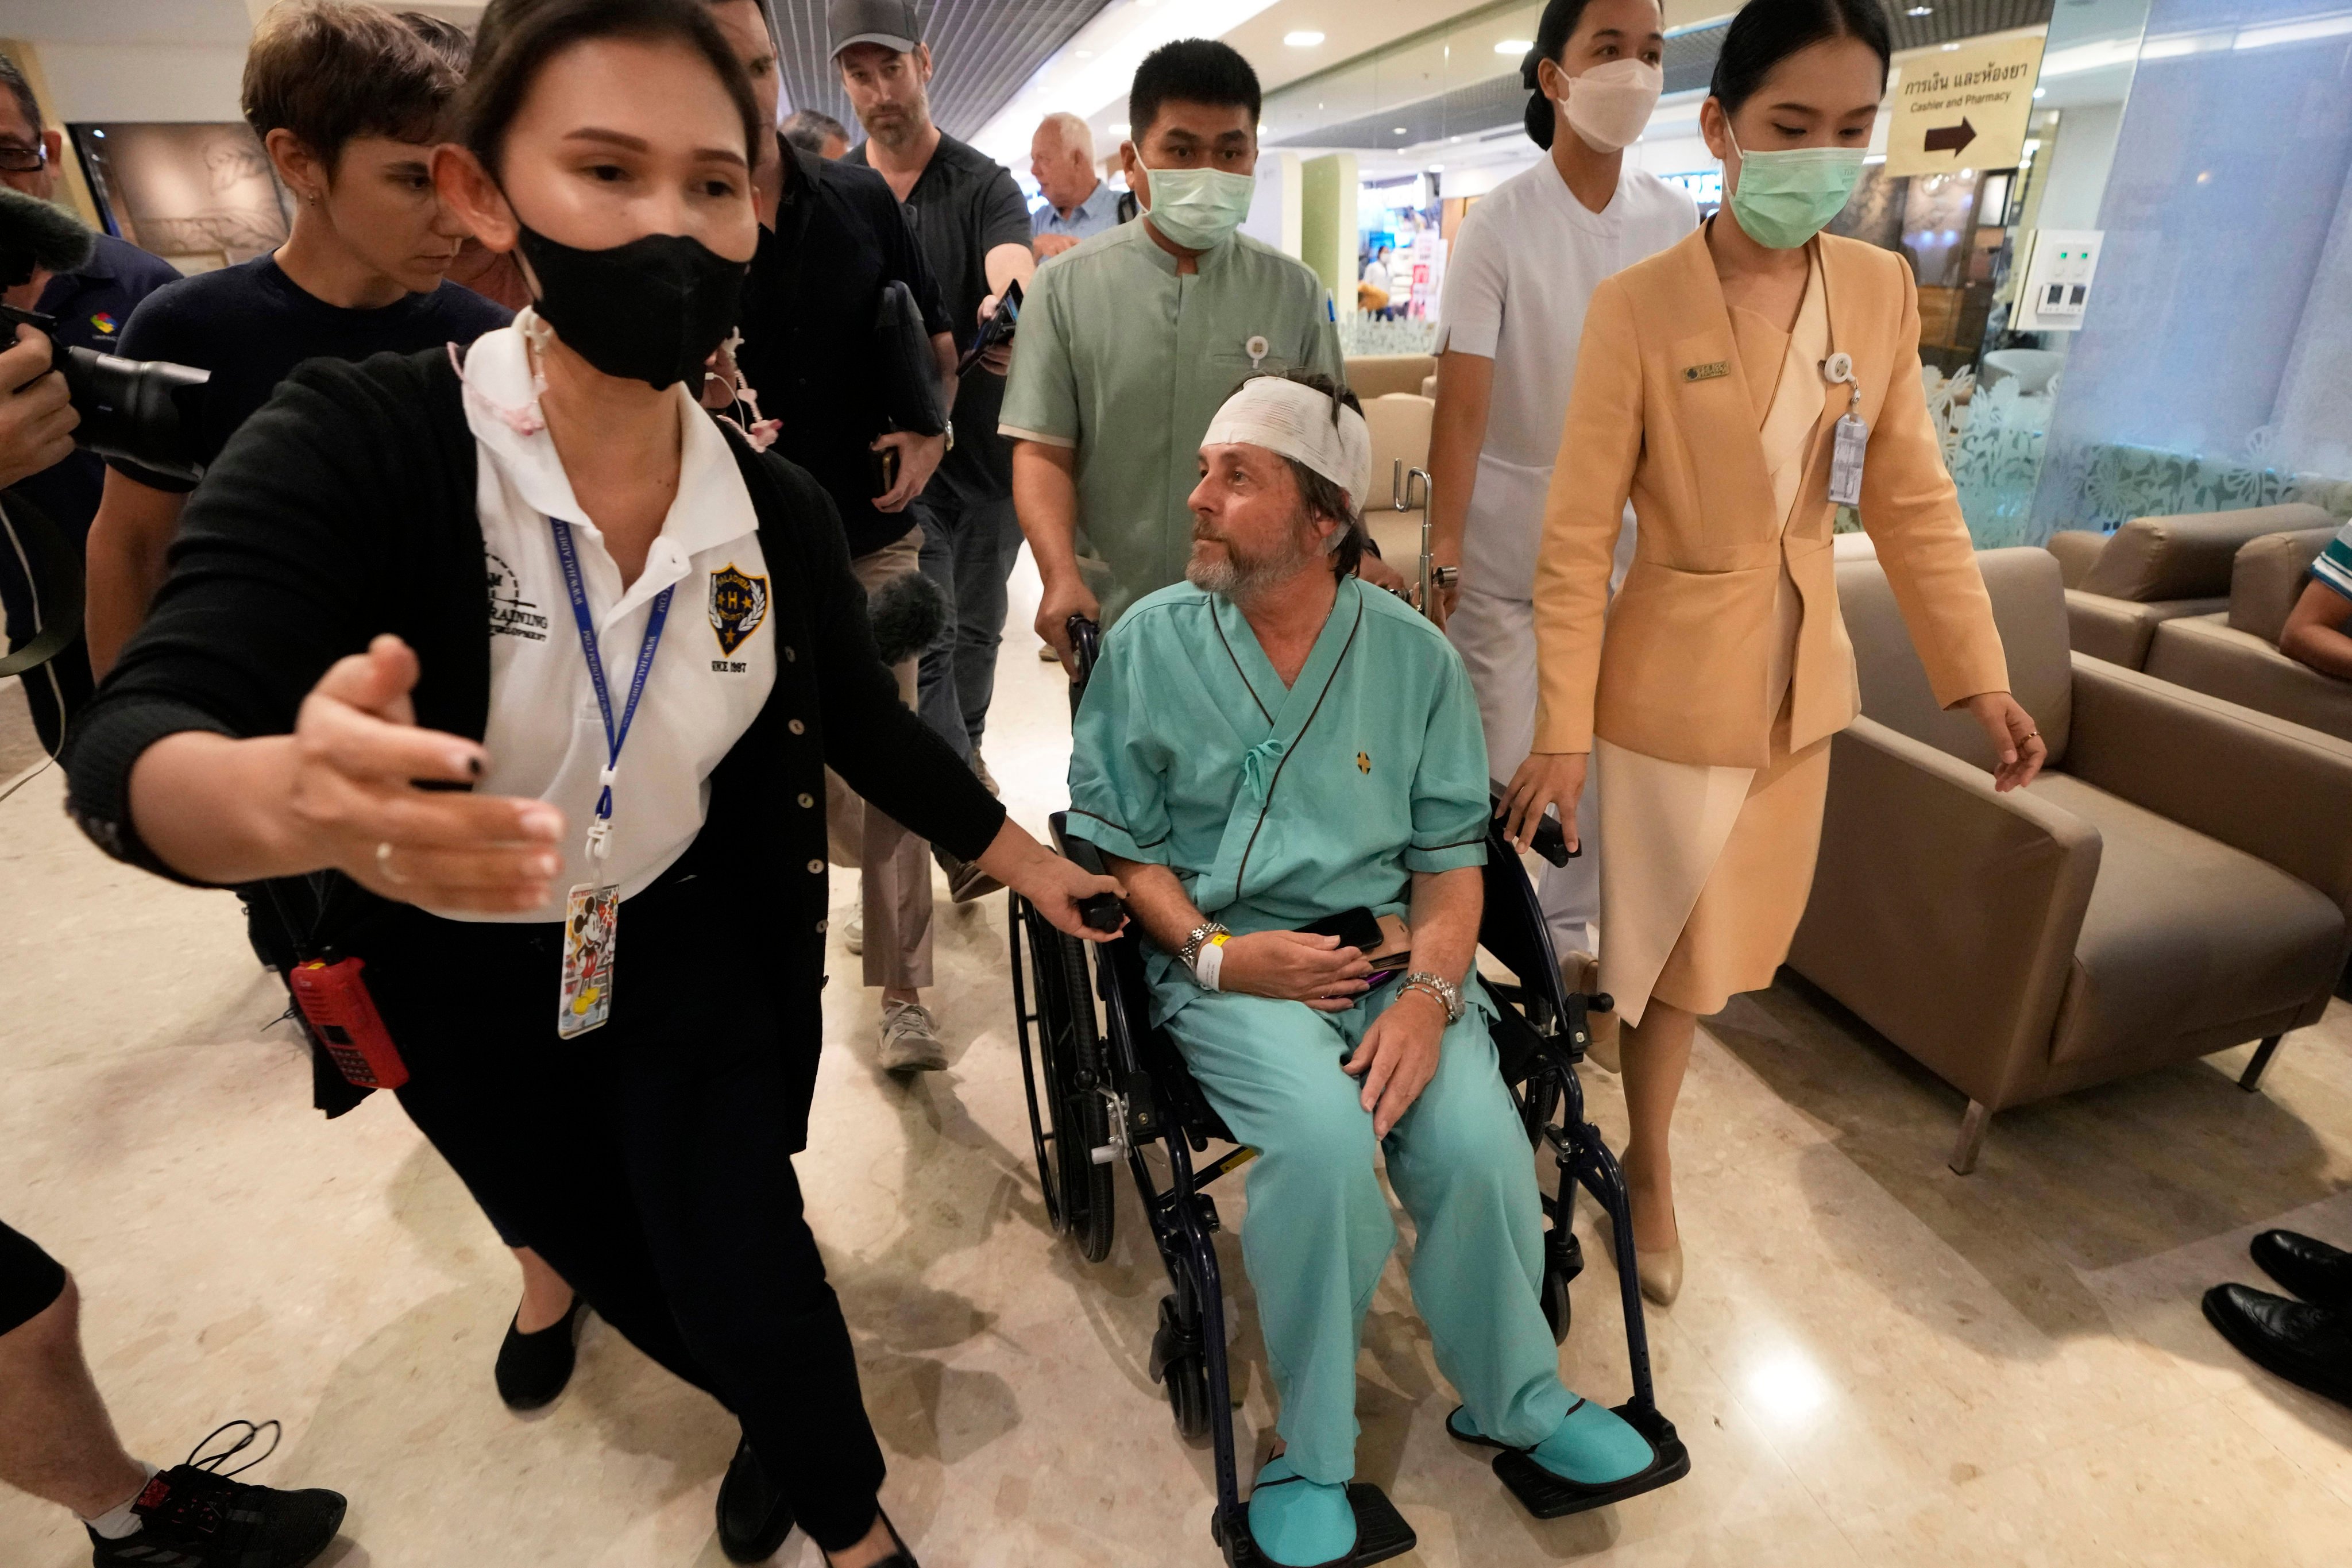 An Australian passenger who was injured on Singapore Airlines Flight SQ321 is seen at a hospital in Bangkok on May 23. Photo: AP